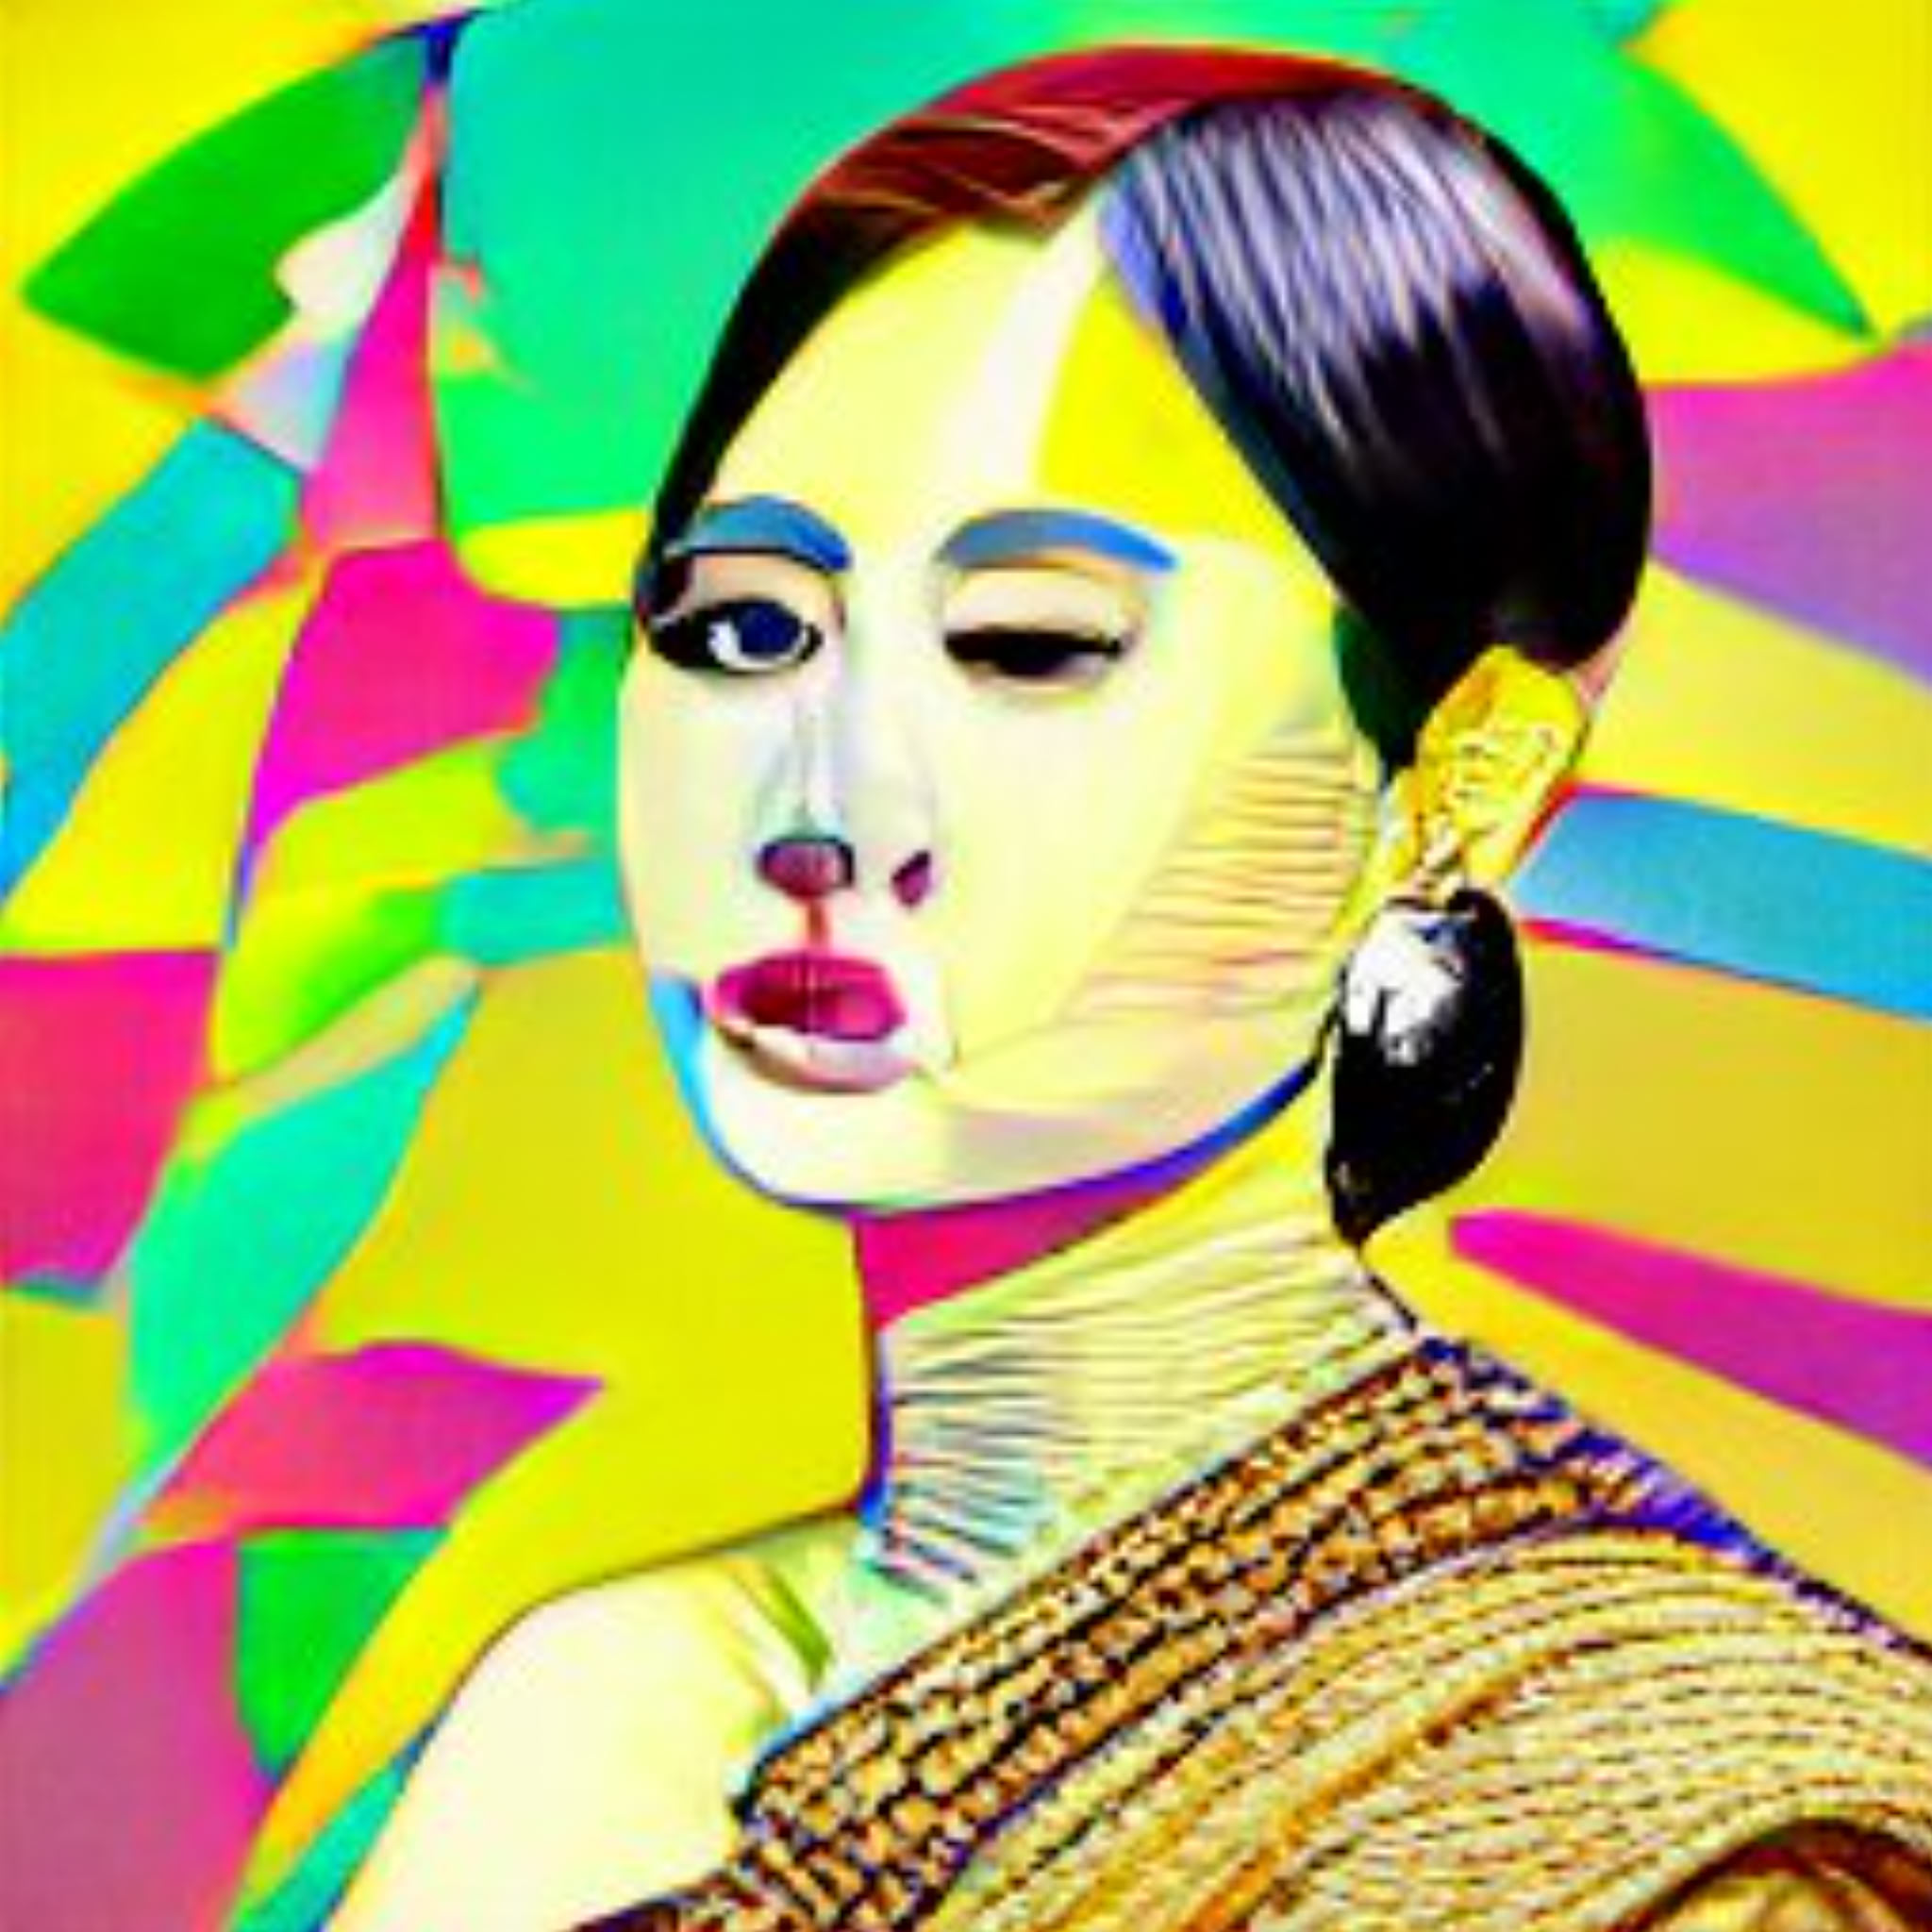 photo-realistic-portrait-of-a-thai-woman-in-a-traditional-outfit-in-pop-art